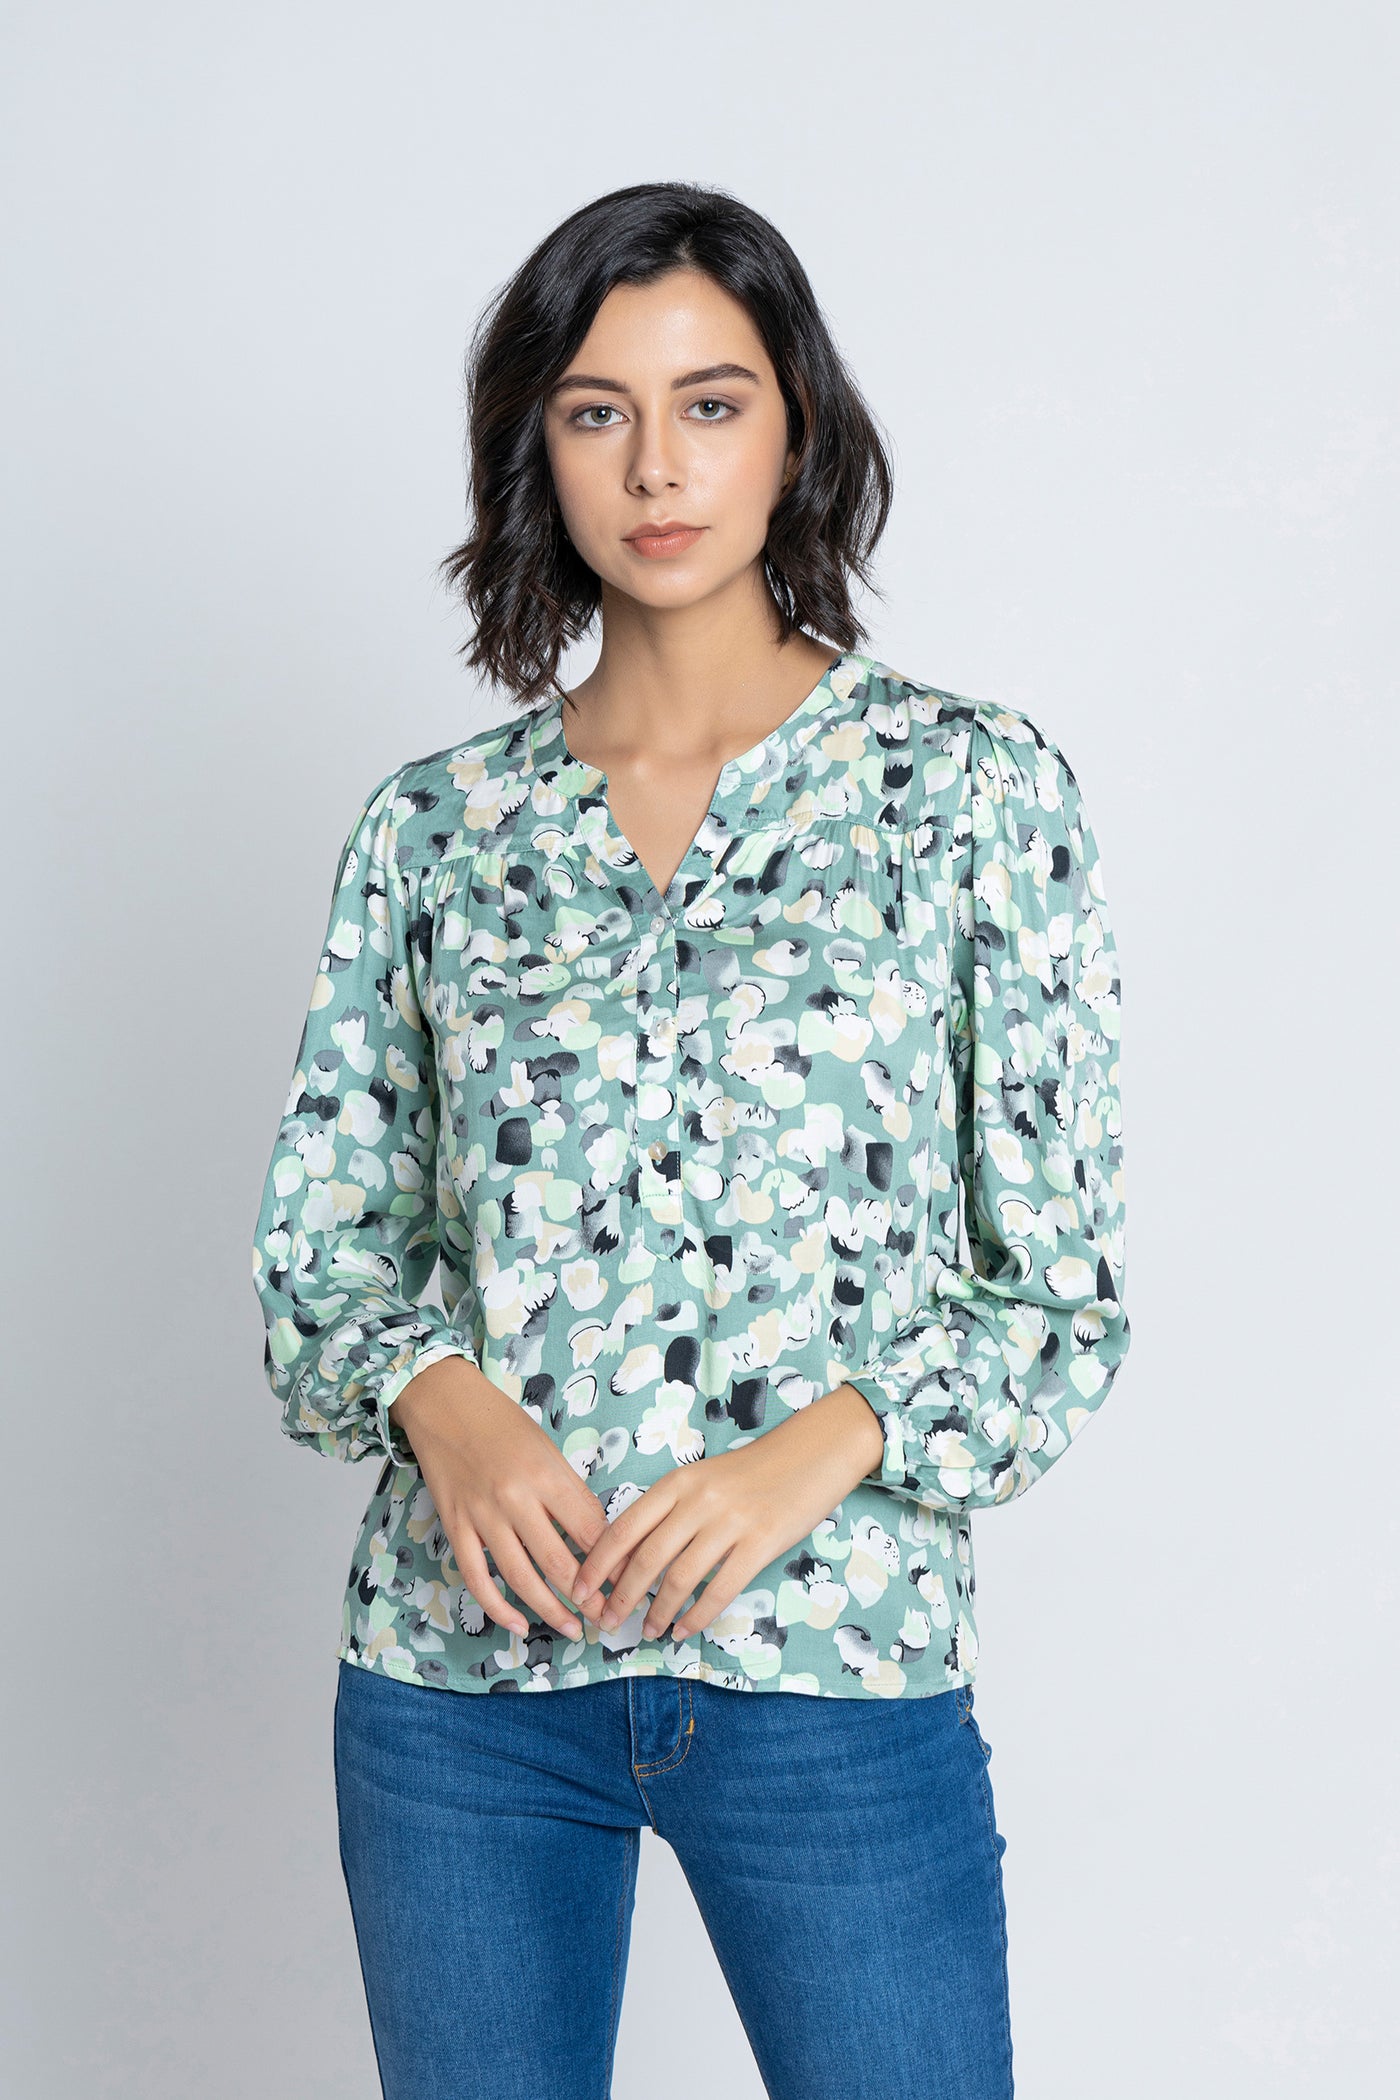 Mint Green Floral Printed Blouse